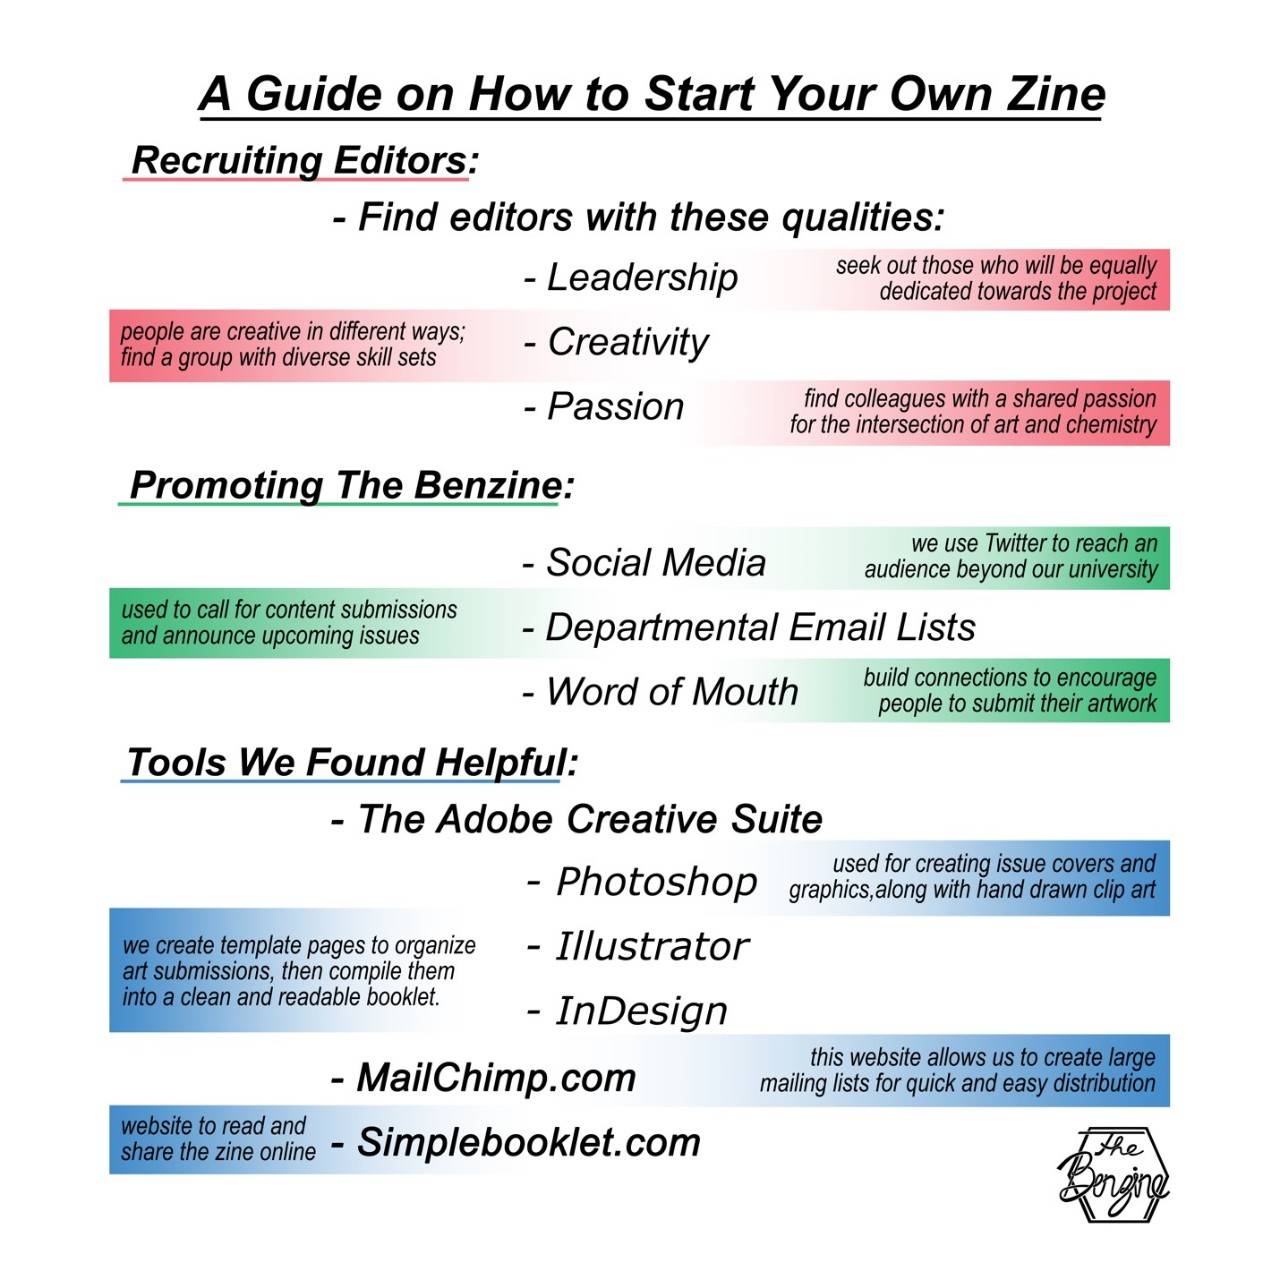 Figure 3. A guide to starting your own zine.